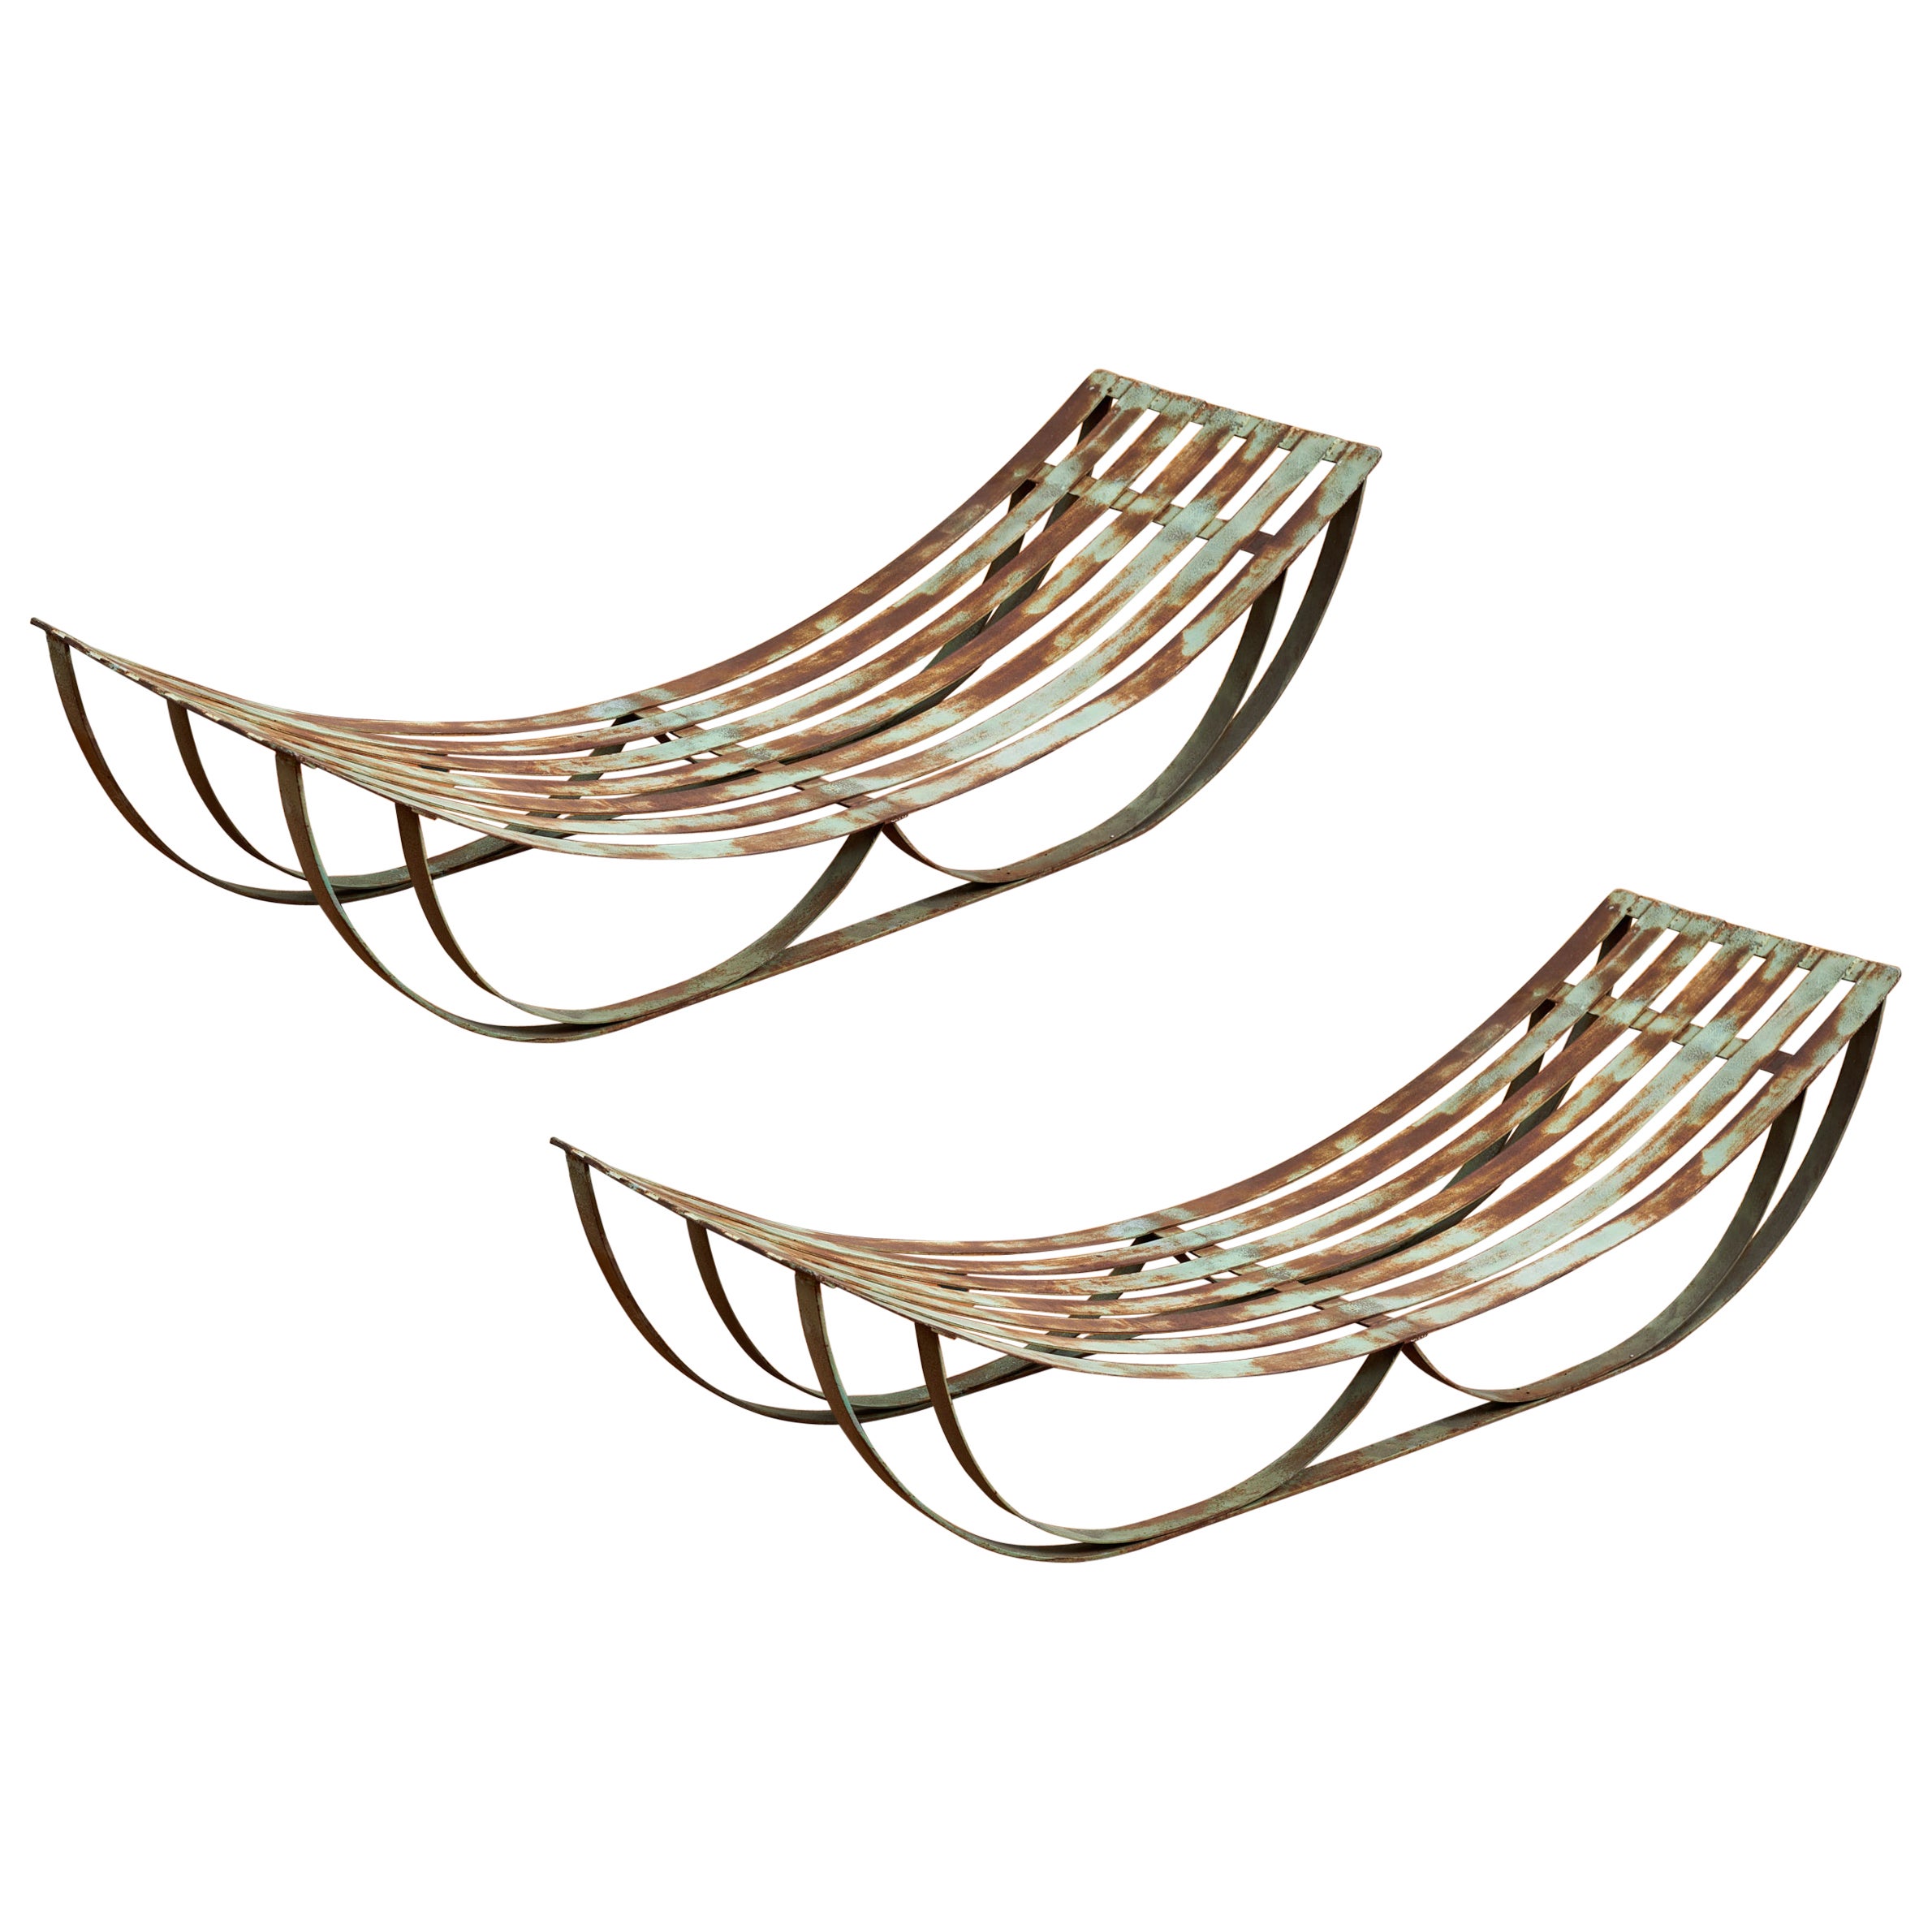 Circa 1950 French Sculptural Steel Lounges Pair